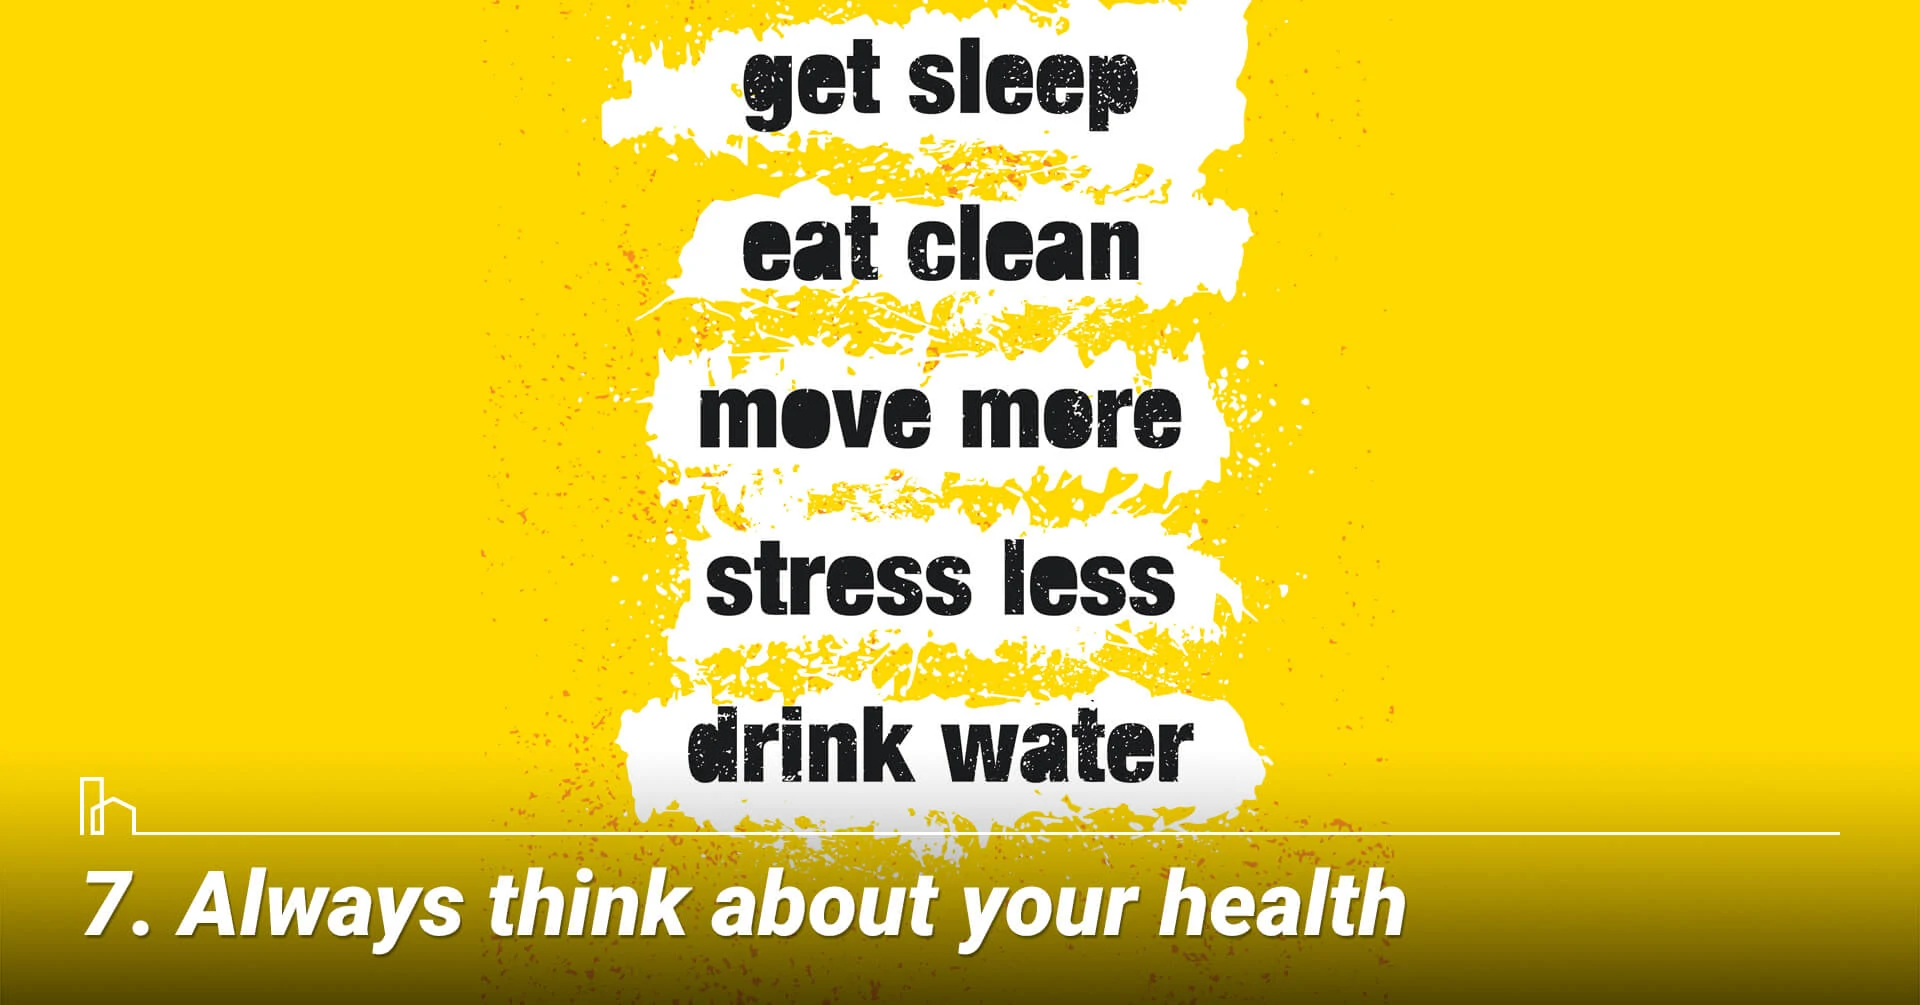 Always think about your health, take care of yourself